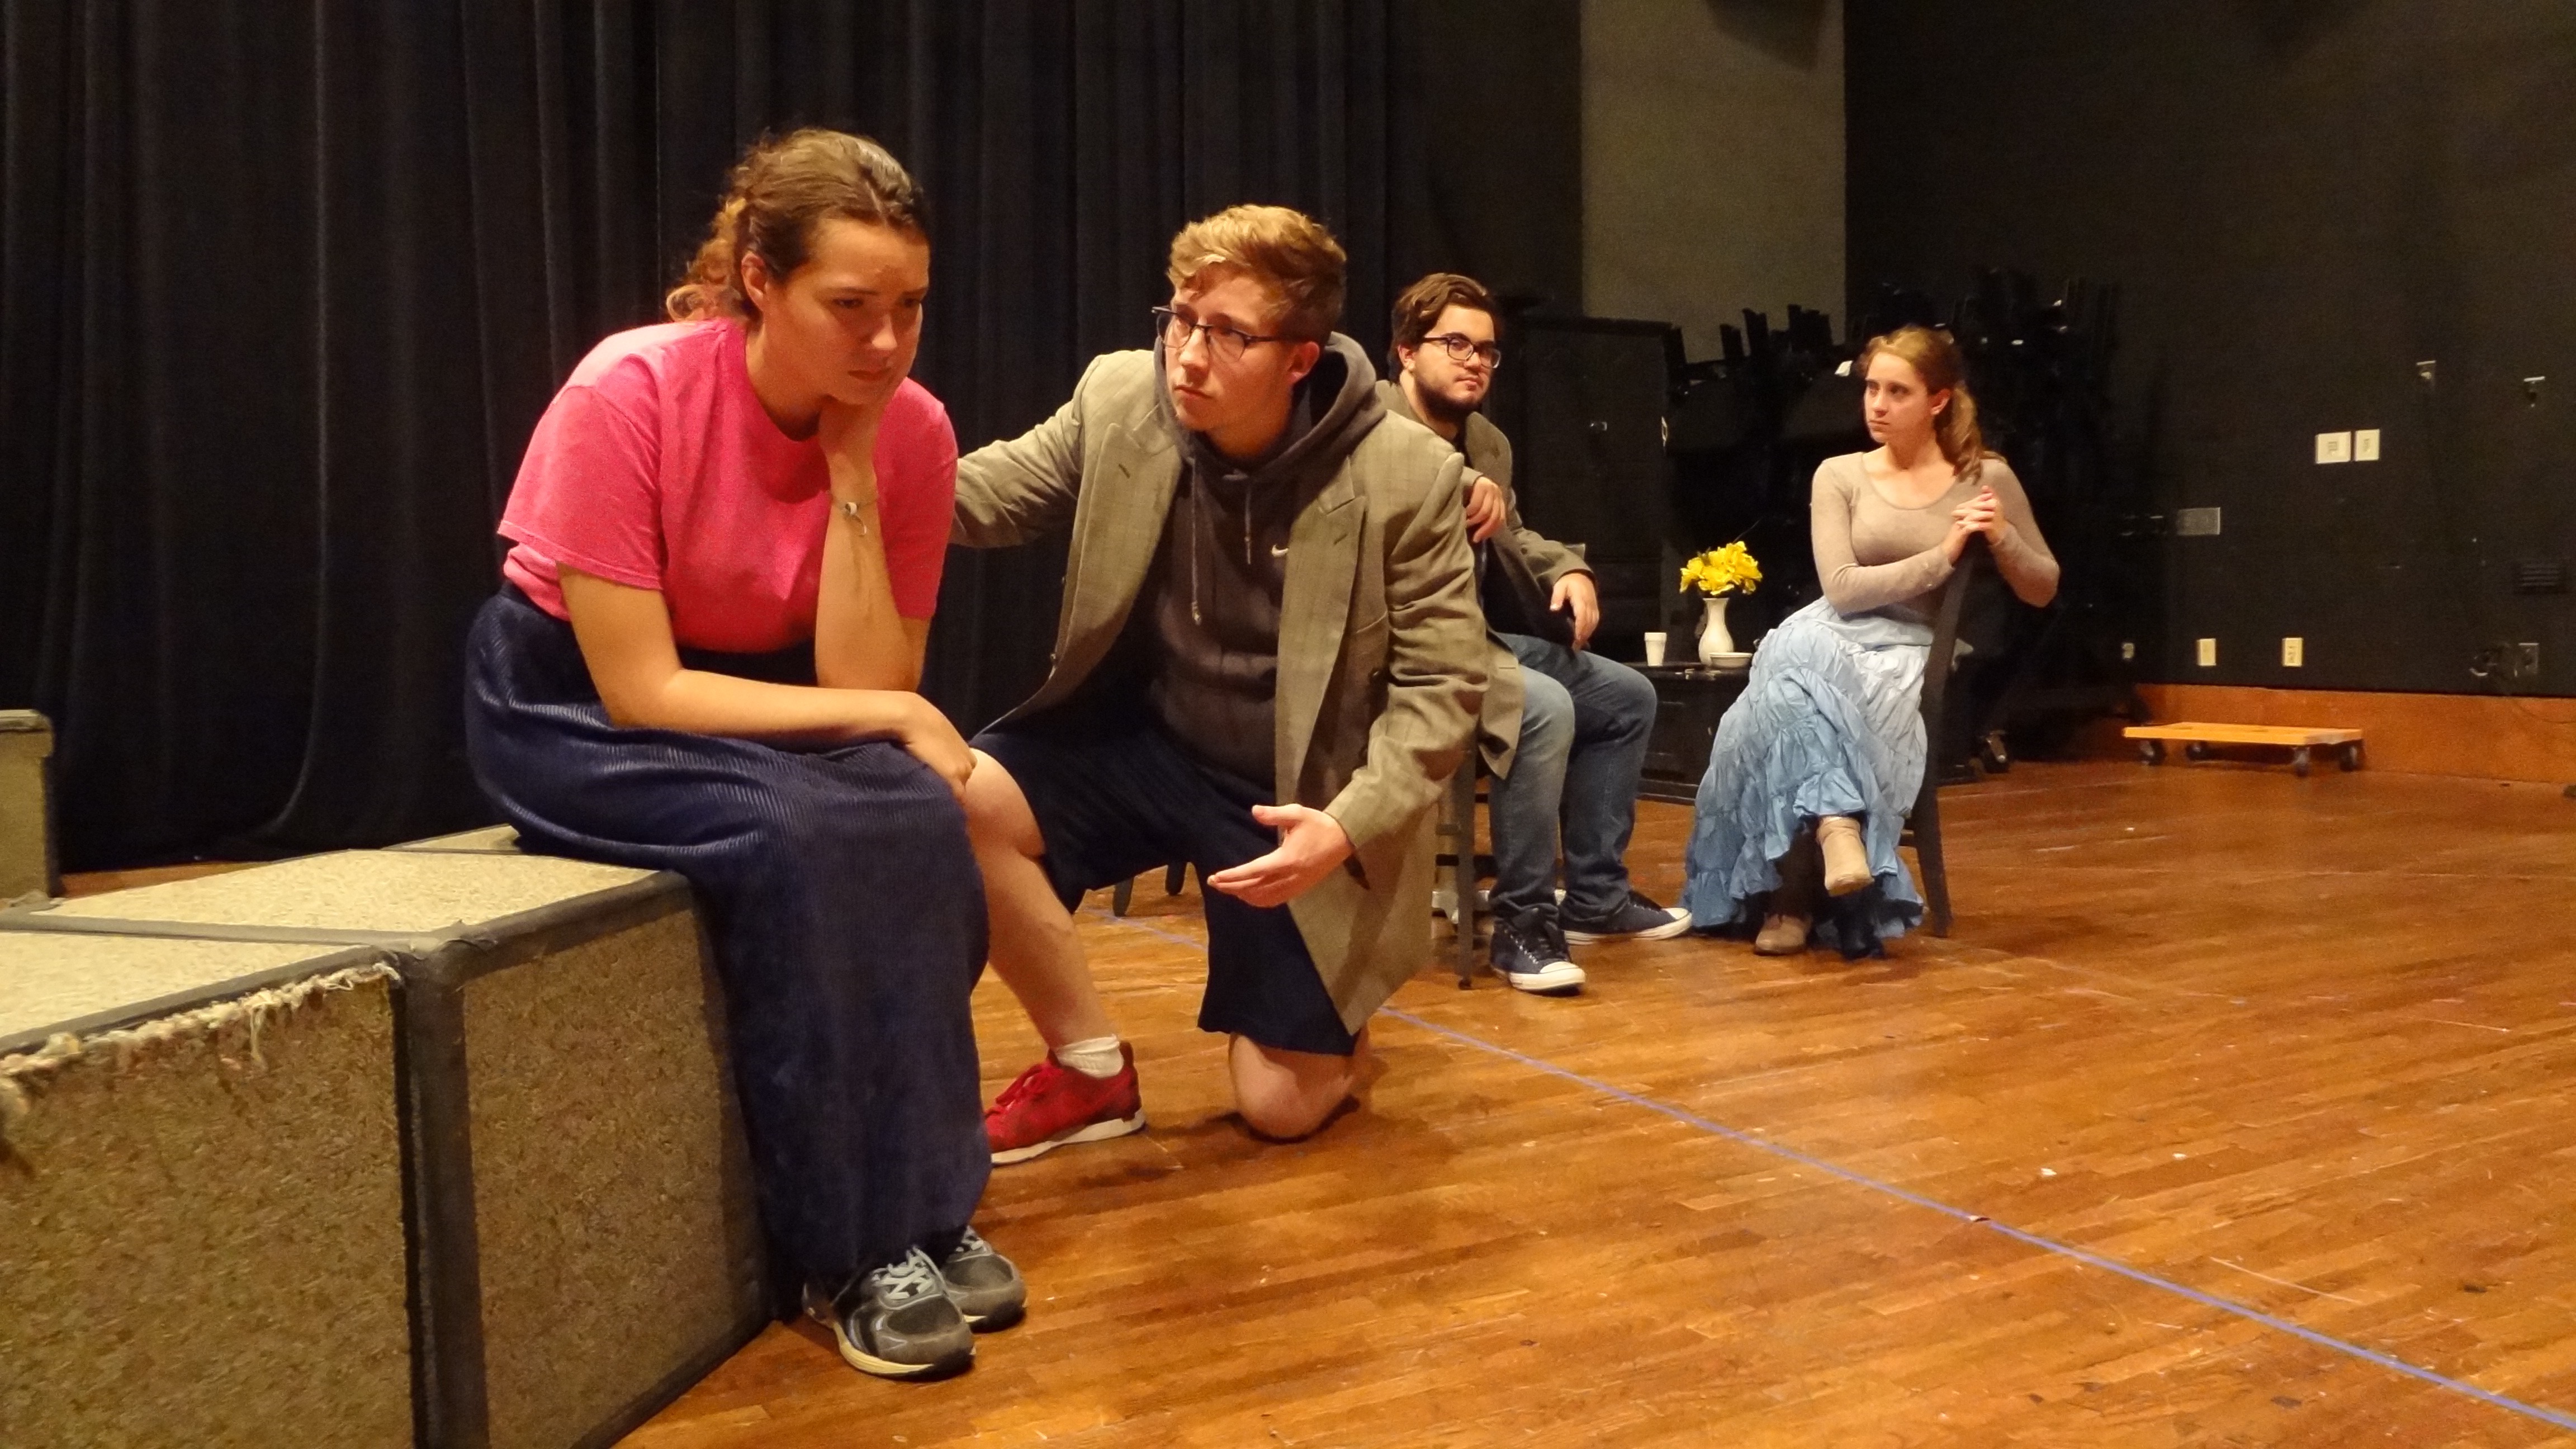 Rehearsing for The University of Scranton Players’ production of Tennessee Williams’ play “The Glass Menagerie,” which will run Sept. 22-24 and Sept. 29-Oct. 1, are, from left: Victoria Pennington, Conor Hurley, Nicolas Gangone and Ali Basalyga.